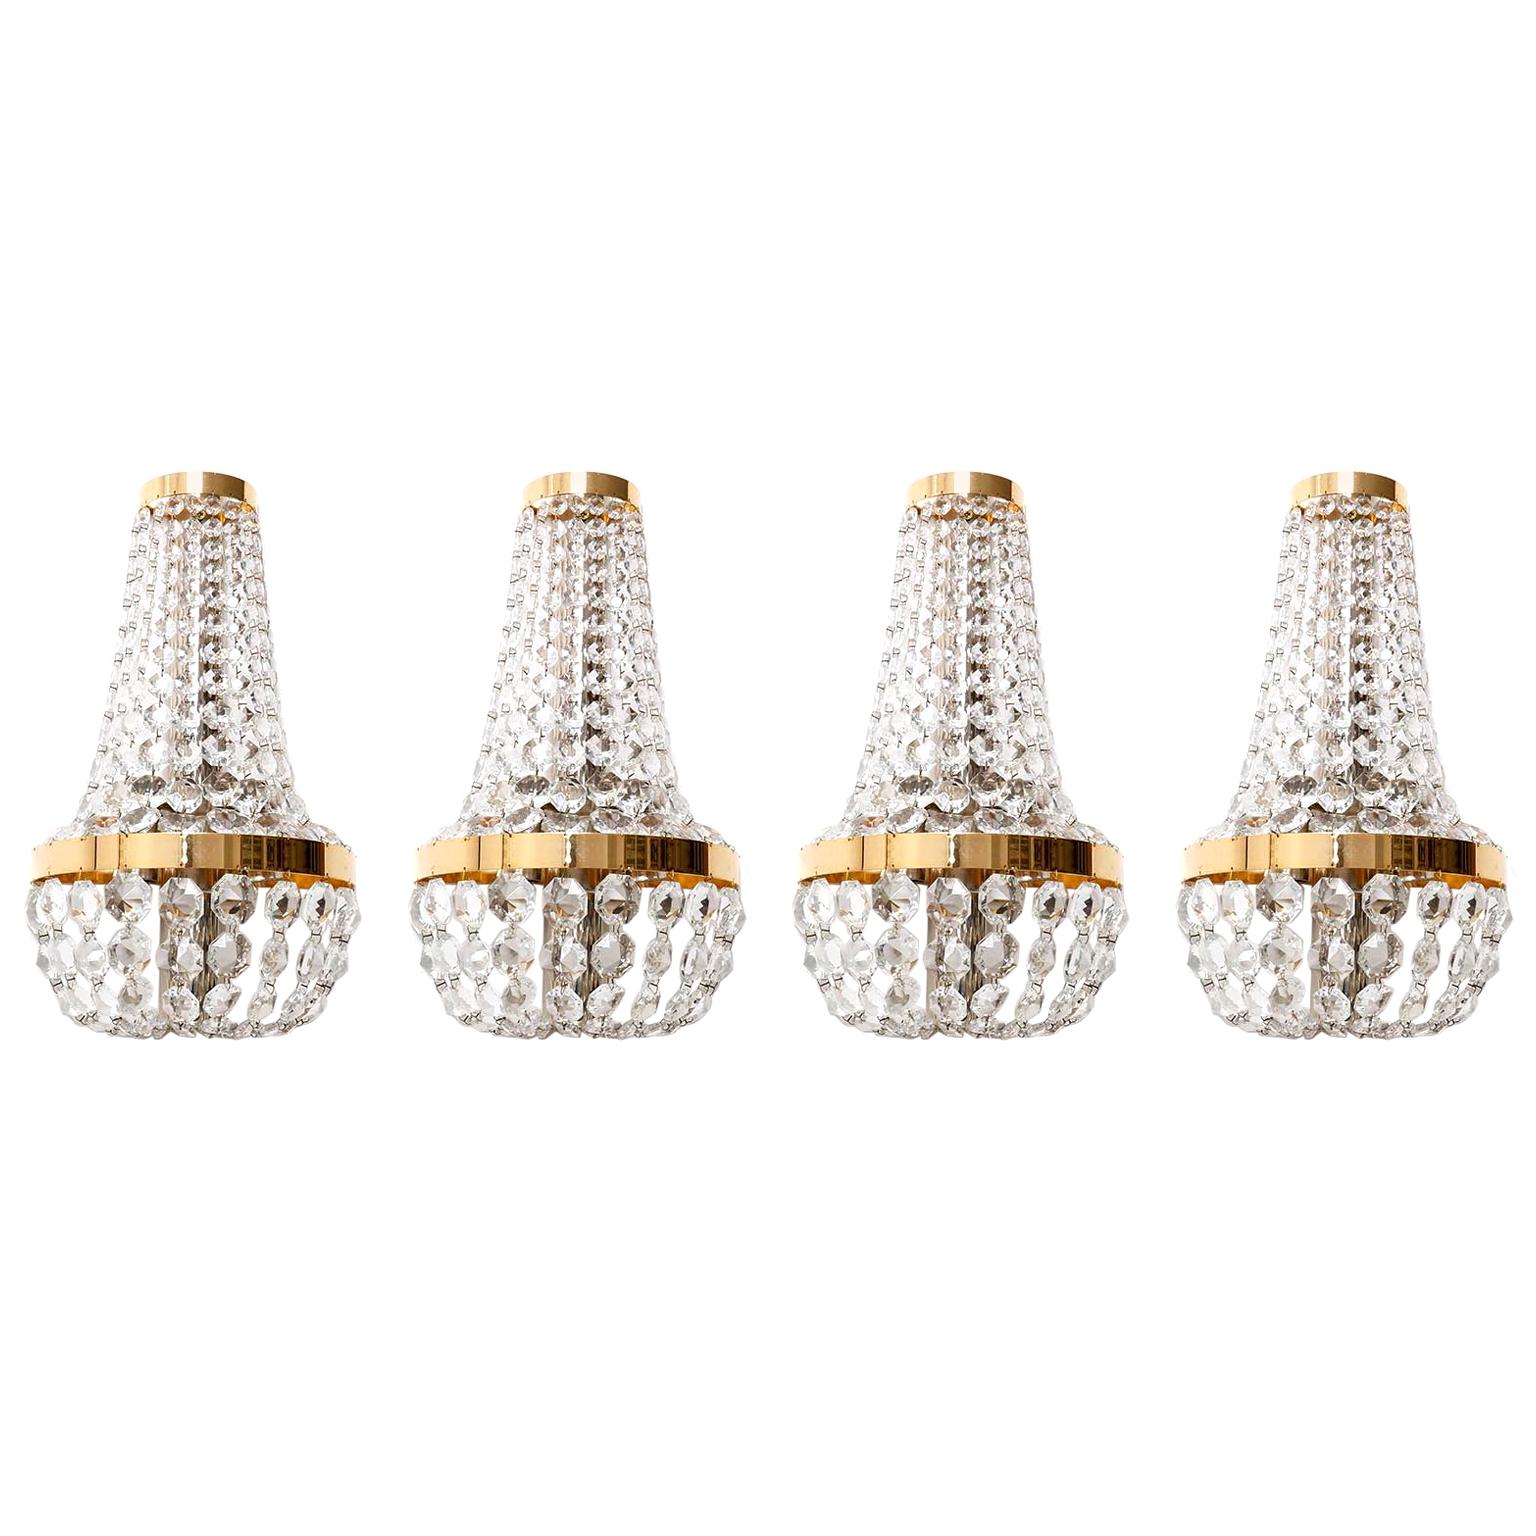 Four Large Bakalowits Wall Lights Sconces, Brass Nickel Crystal, Austria, 1950s